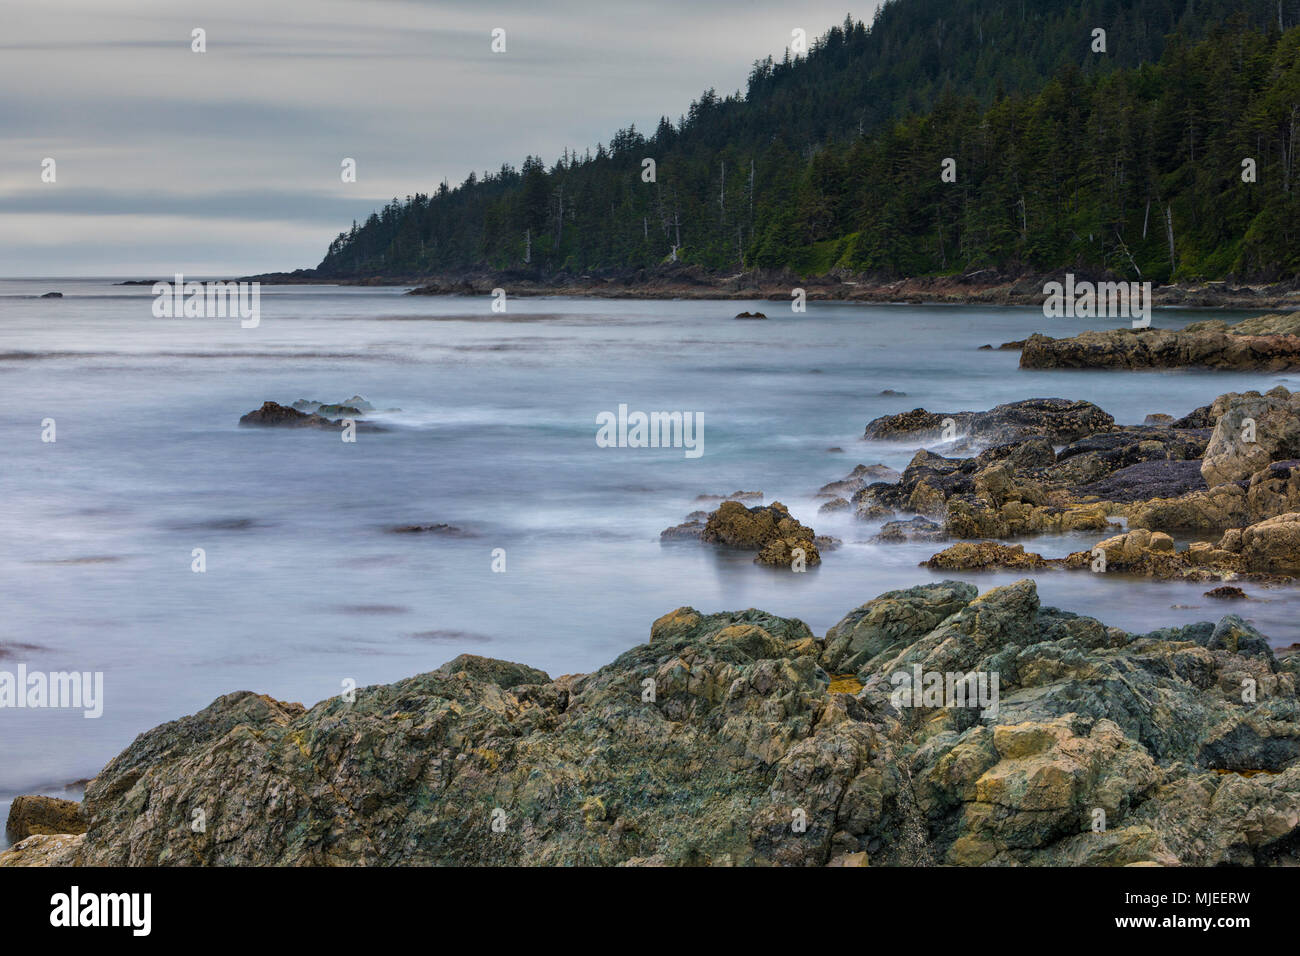 Peaceful cloudy day at Cape Palmerston, Northern Vancouver Island, British Columbi, Canada Stock Photo